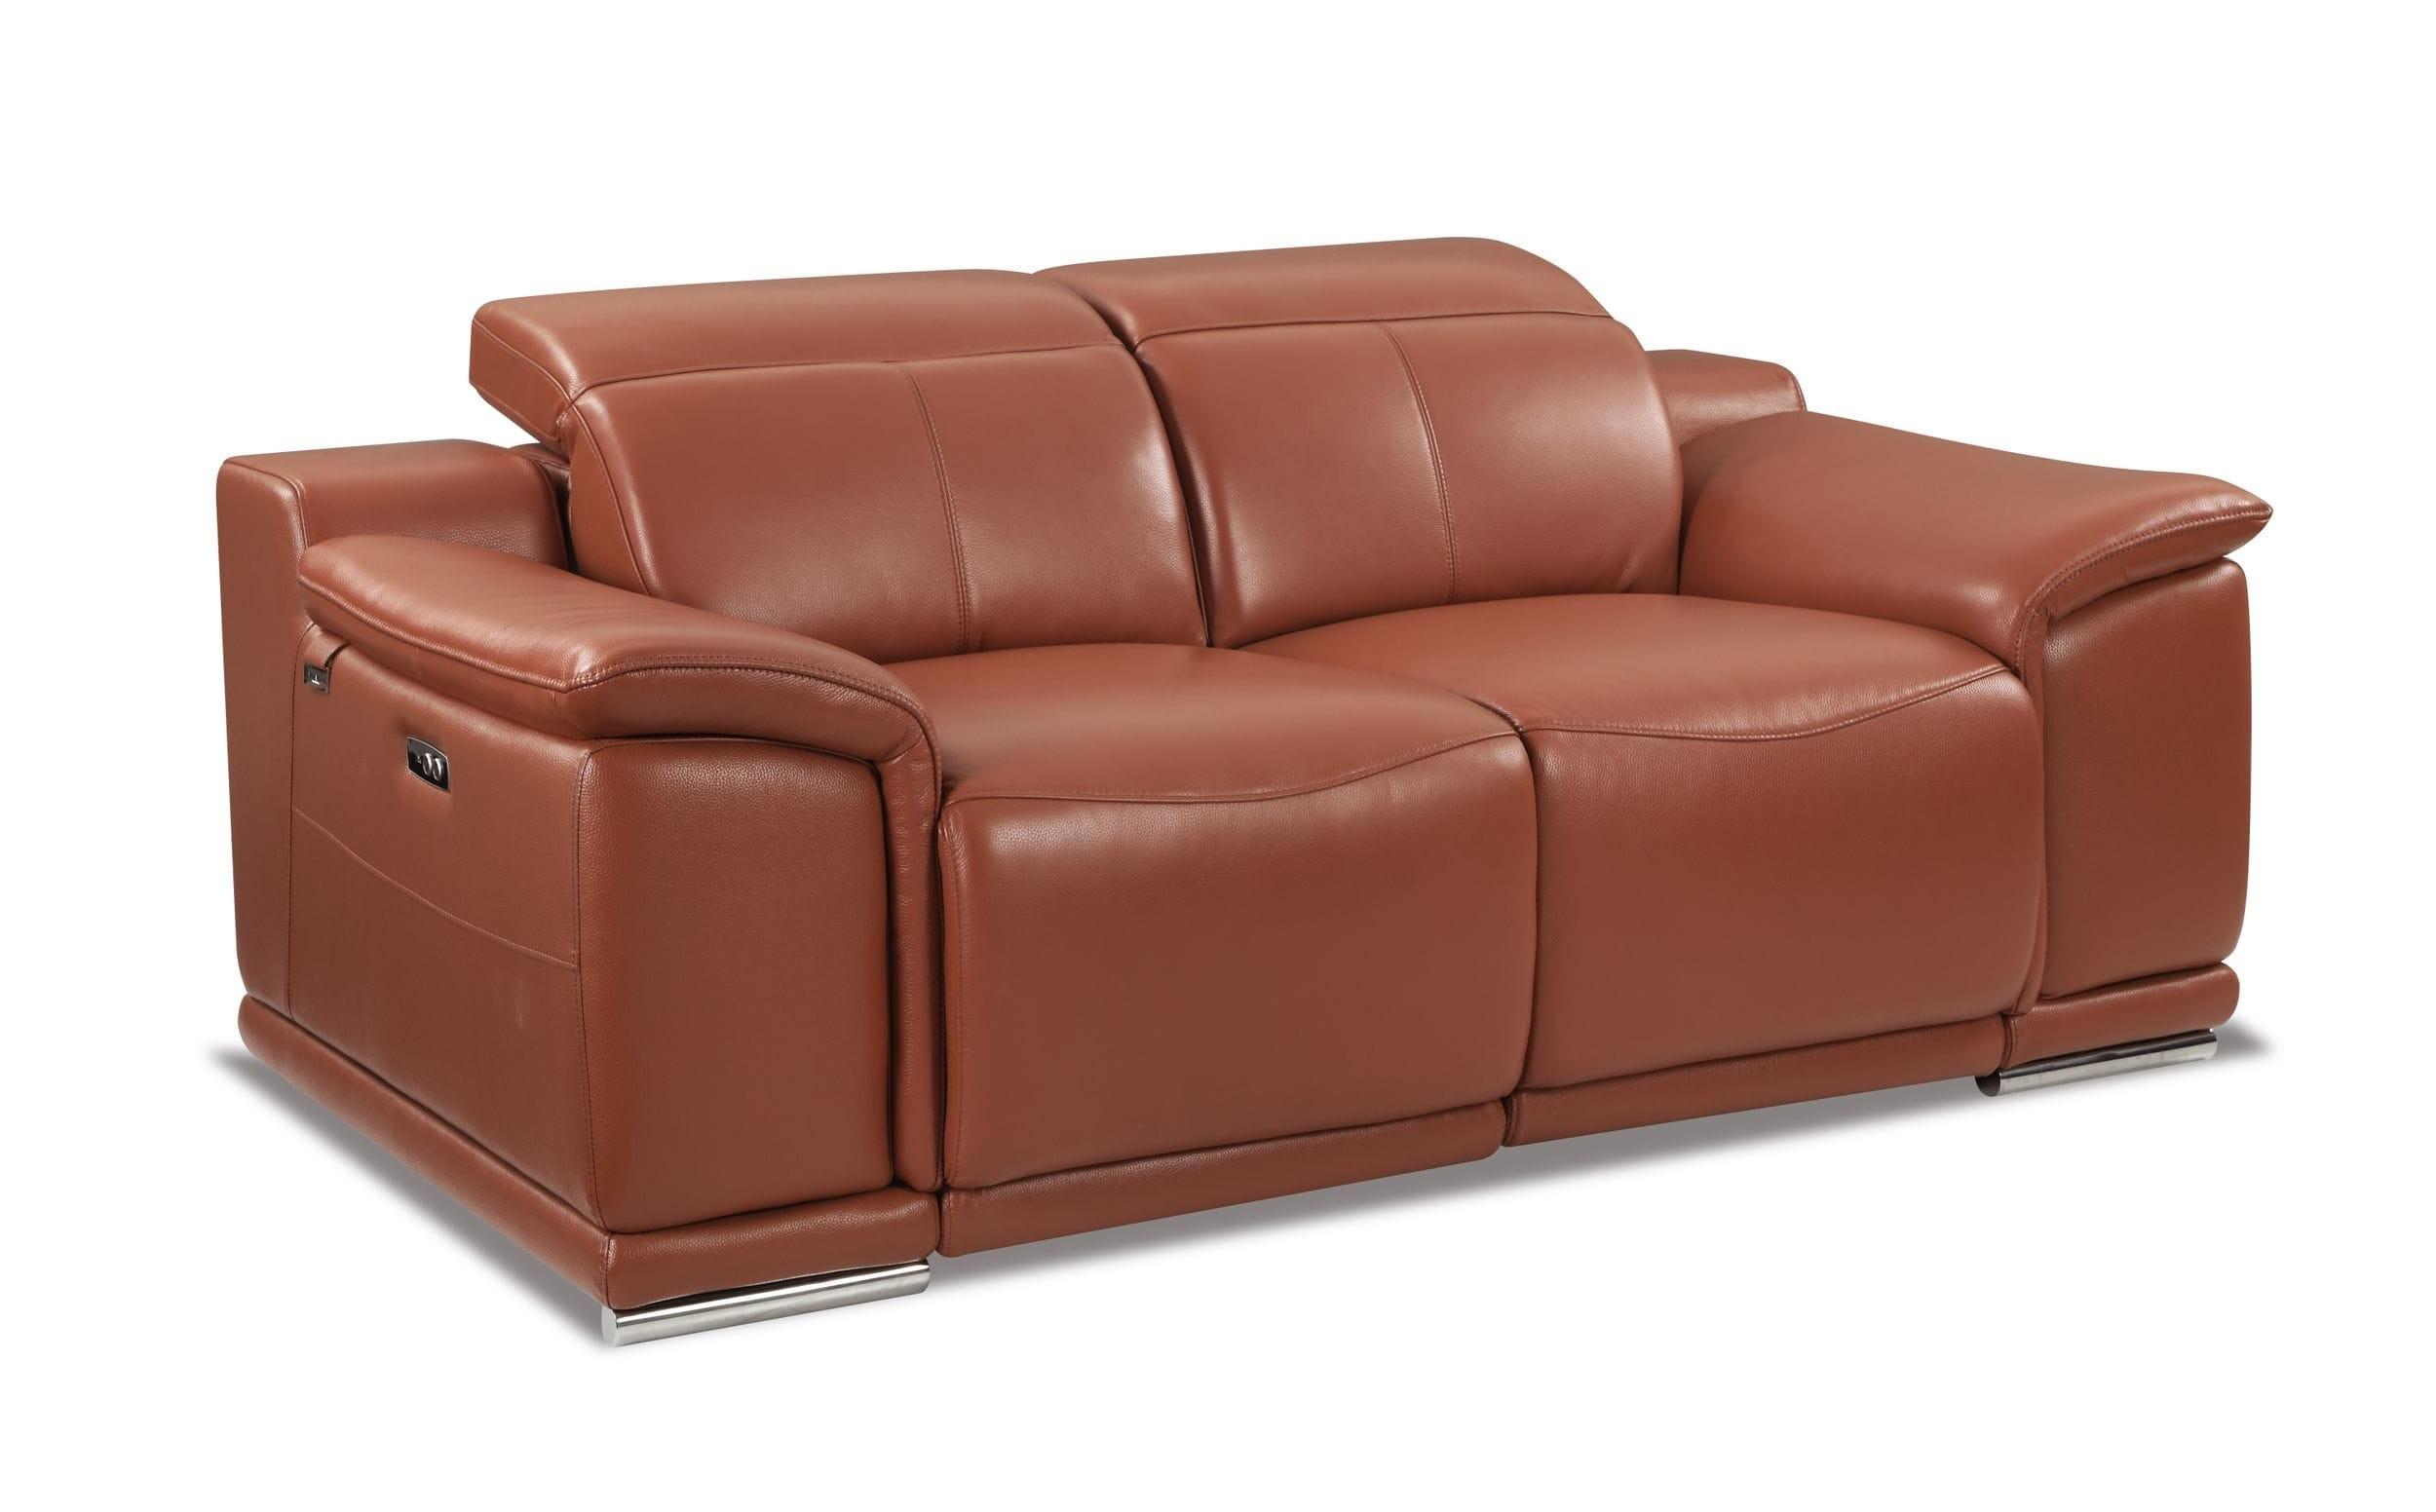 Contemporary Reclining Loveseat 9762 9762-CAMEL-L in Camel Leather Match